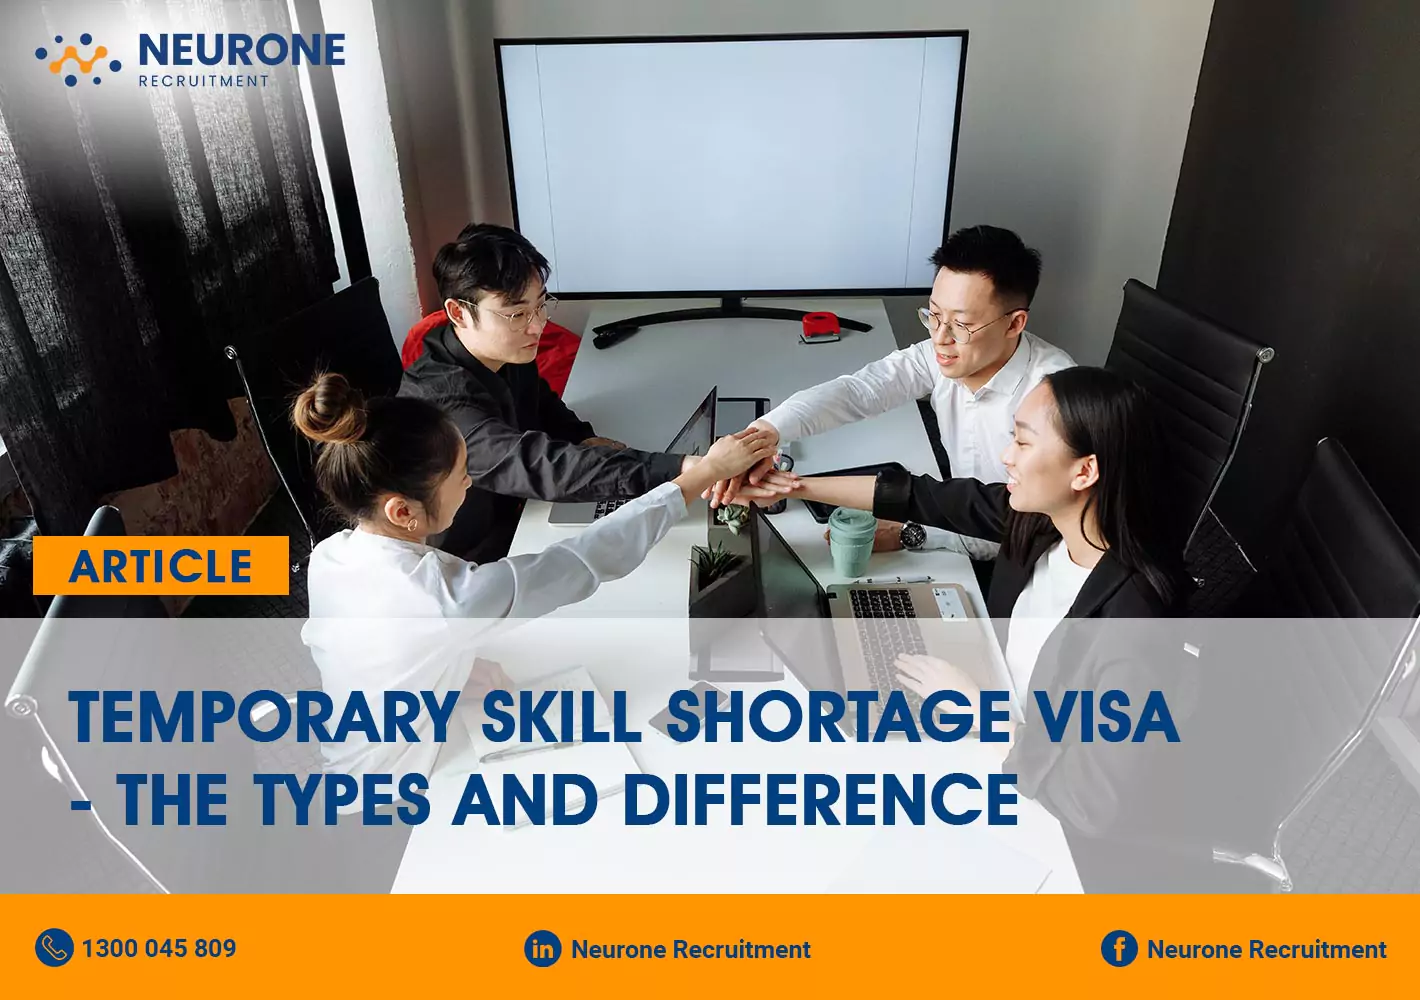 Temporary Skill Shortage Visa - The Types and Difference